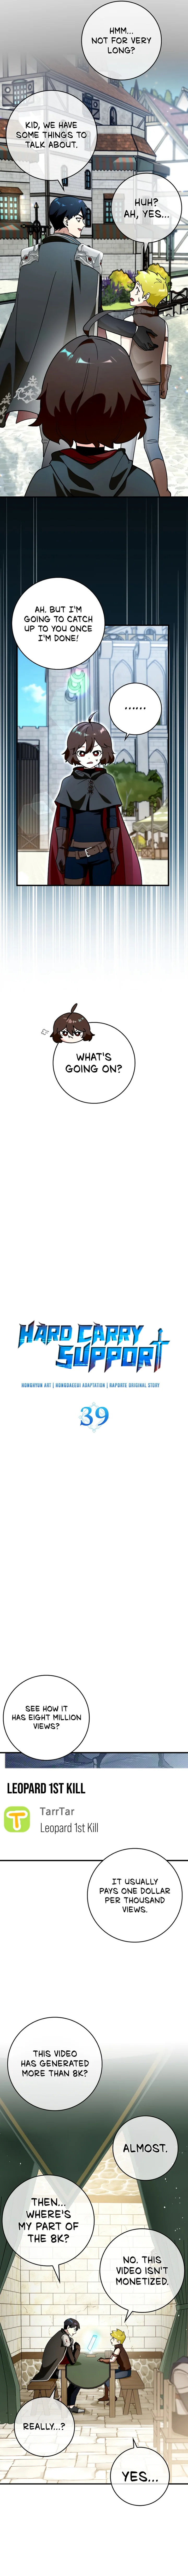 Hard Carry Support - Chapter 39 Page 2